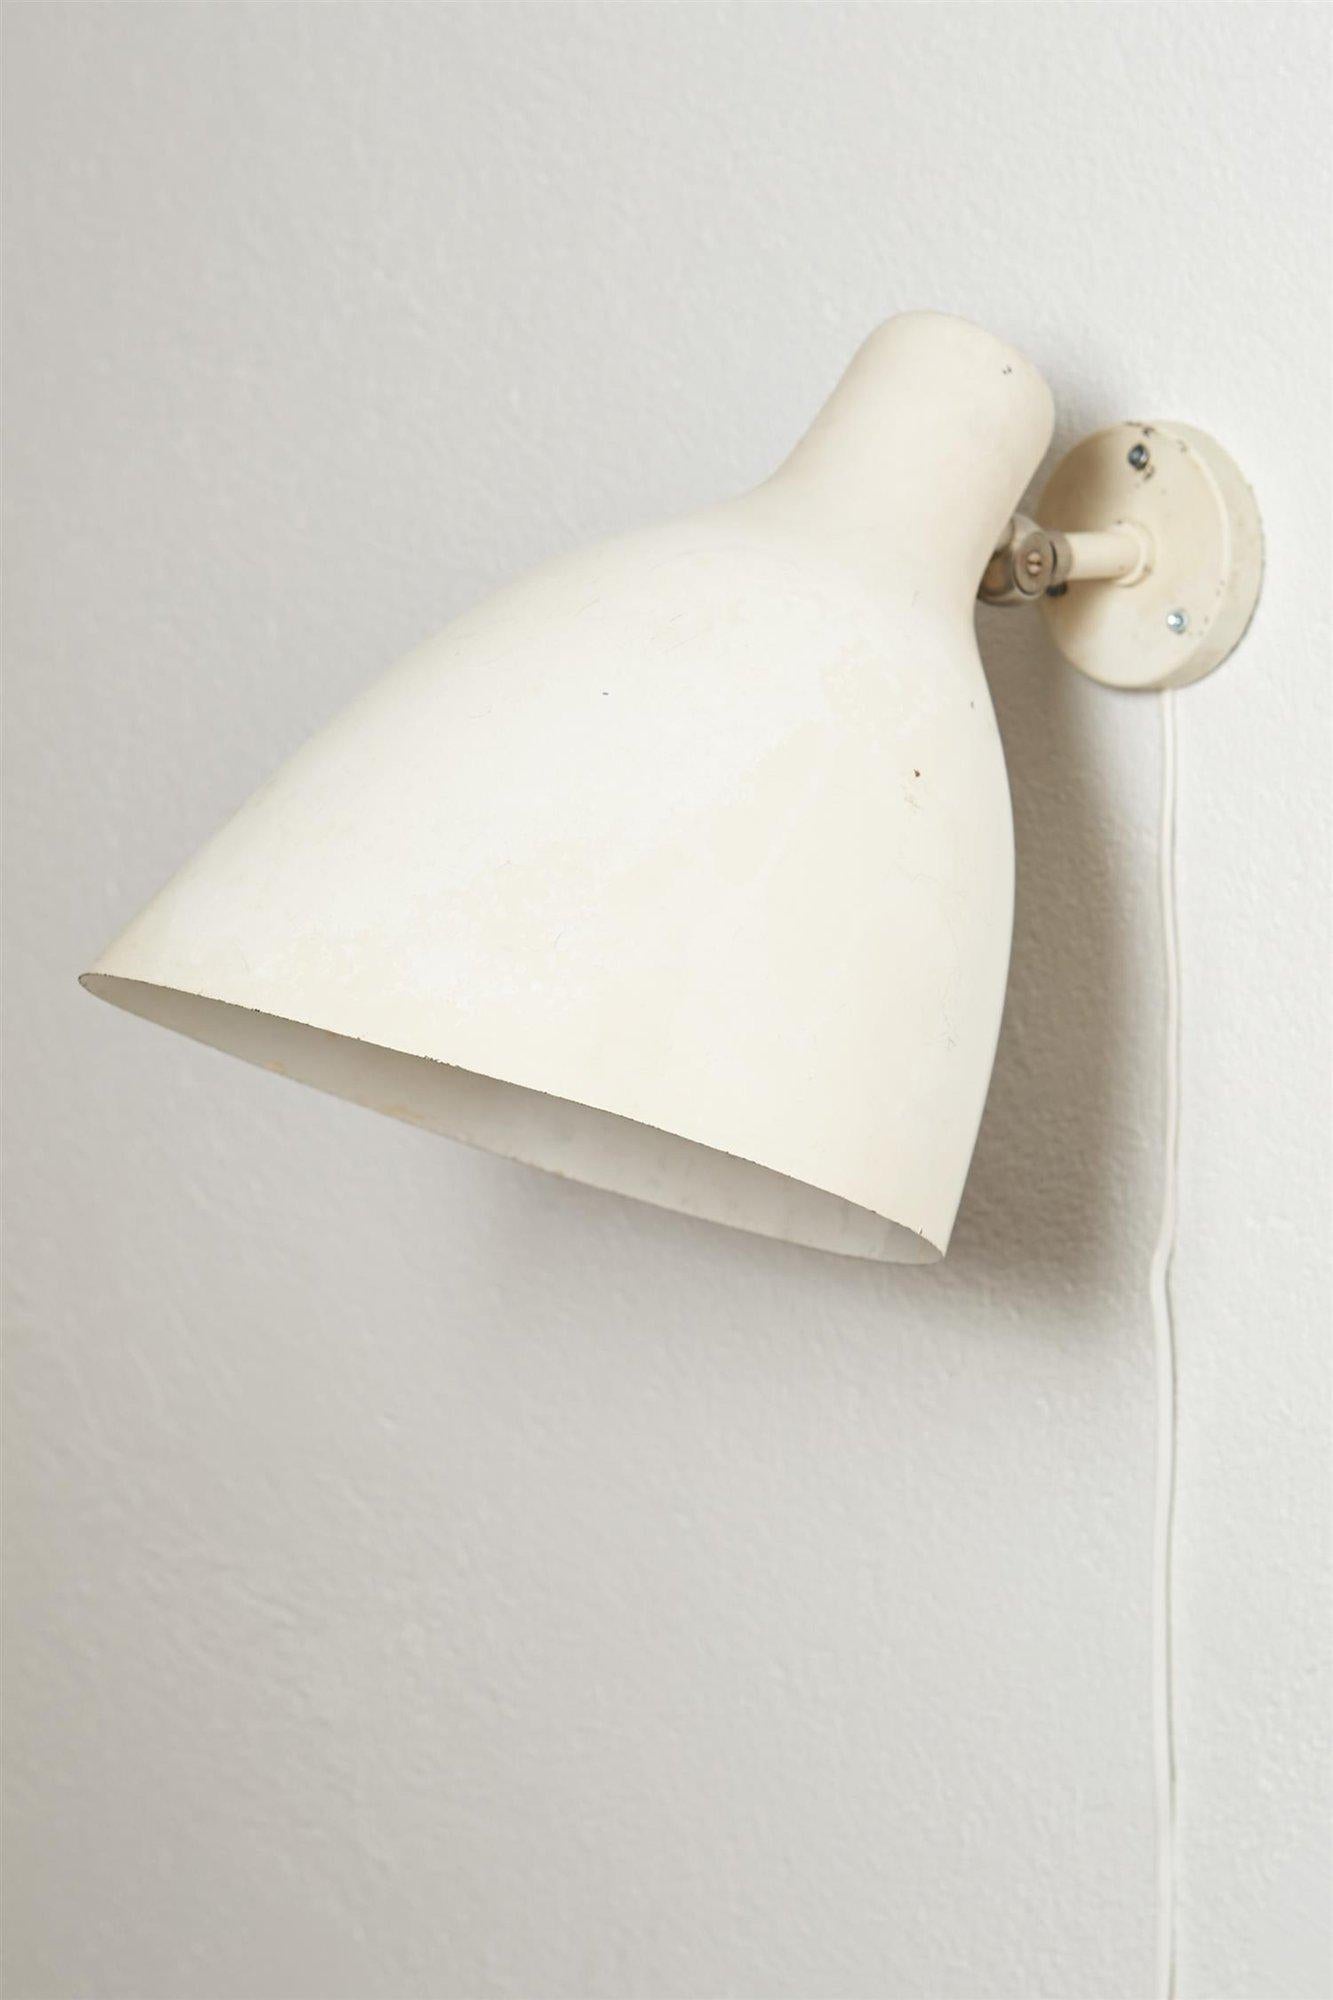 Provenance: Gothenburg law courts.

Length of the fitting: 29 cm/ 11 1/2